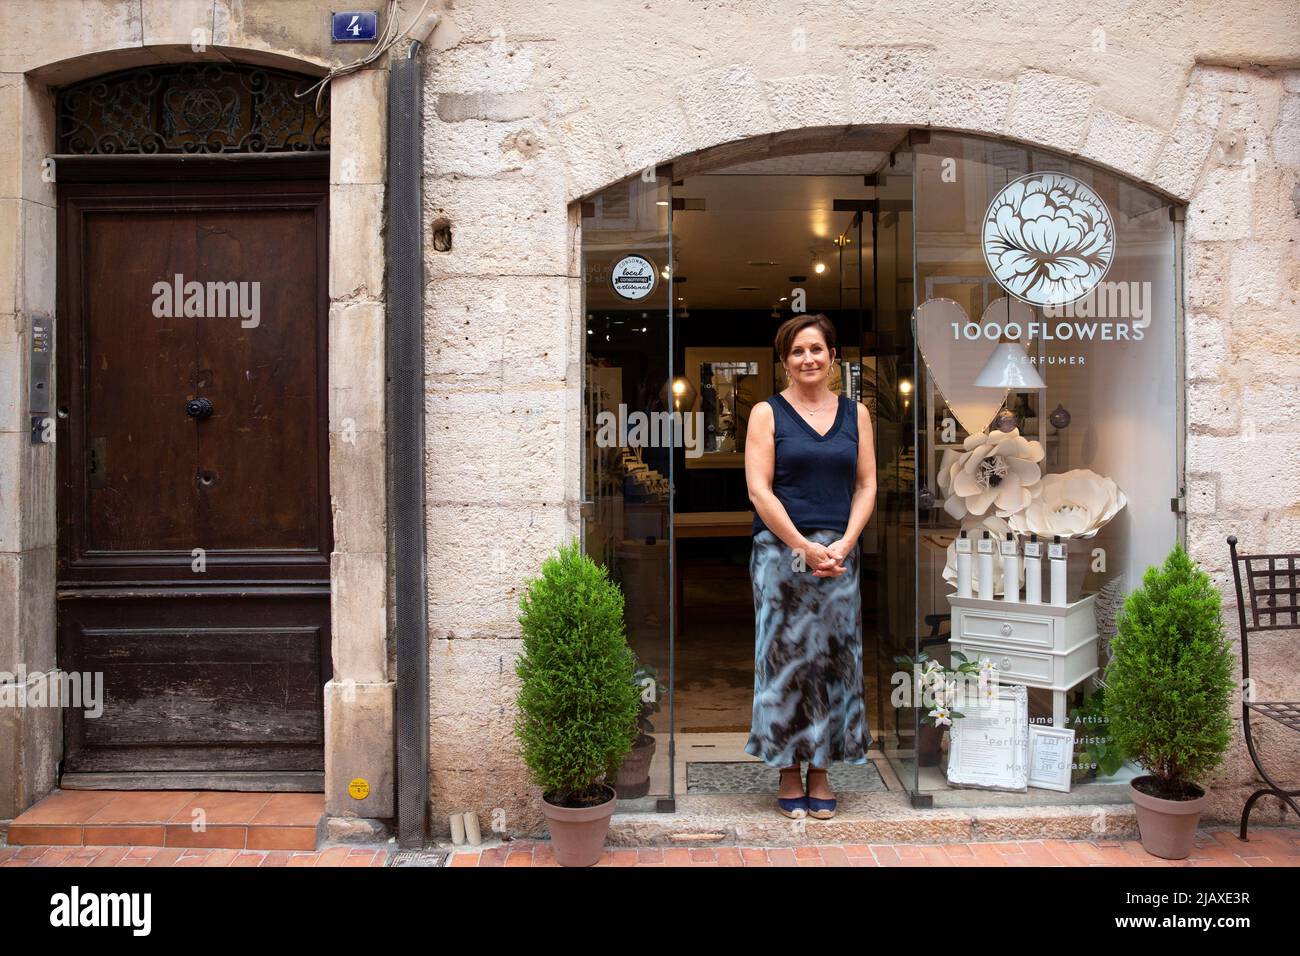 Jessica Buchanan, a perfume maker from Canada, portrayed in front of her shop “1000 flowers” in Grasse, France on September 9, 2021. Jessica came to Provence in 2007 to attend the Grasse Institute of Perfumery. Today she has her own boutique in Grasse and is what's known in the business as a nose, or a nez in French. 'We do learn how to smell,' Buchanan says. 'That part of the brain really develops. It's like a muscle. It becomes more developed in a perfumer than in a regular person who's not paying attention to scents every day.' Grasse has had a prospering perfume industry since the end of t Stock Photo